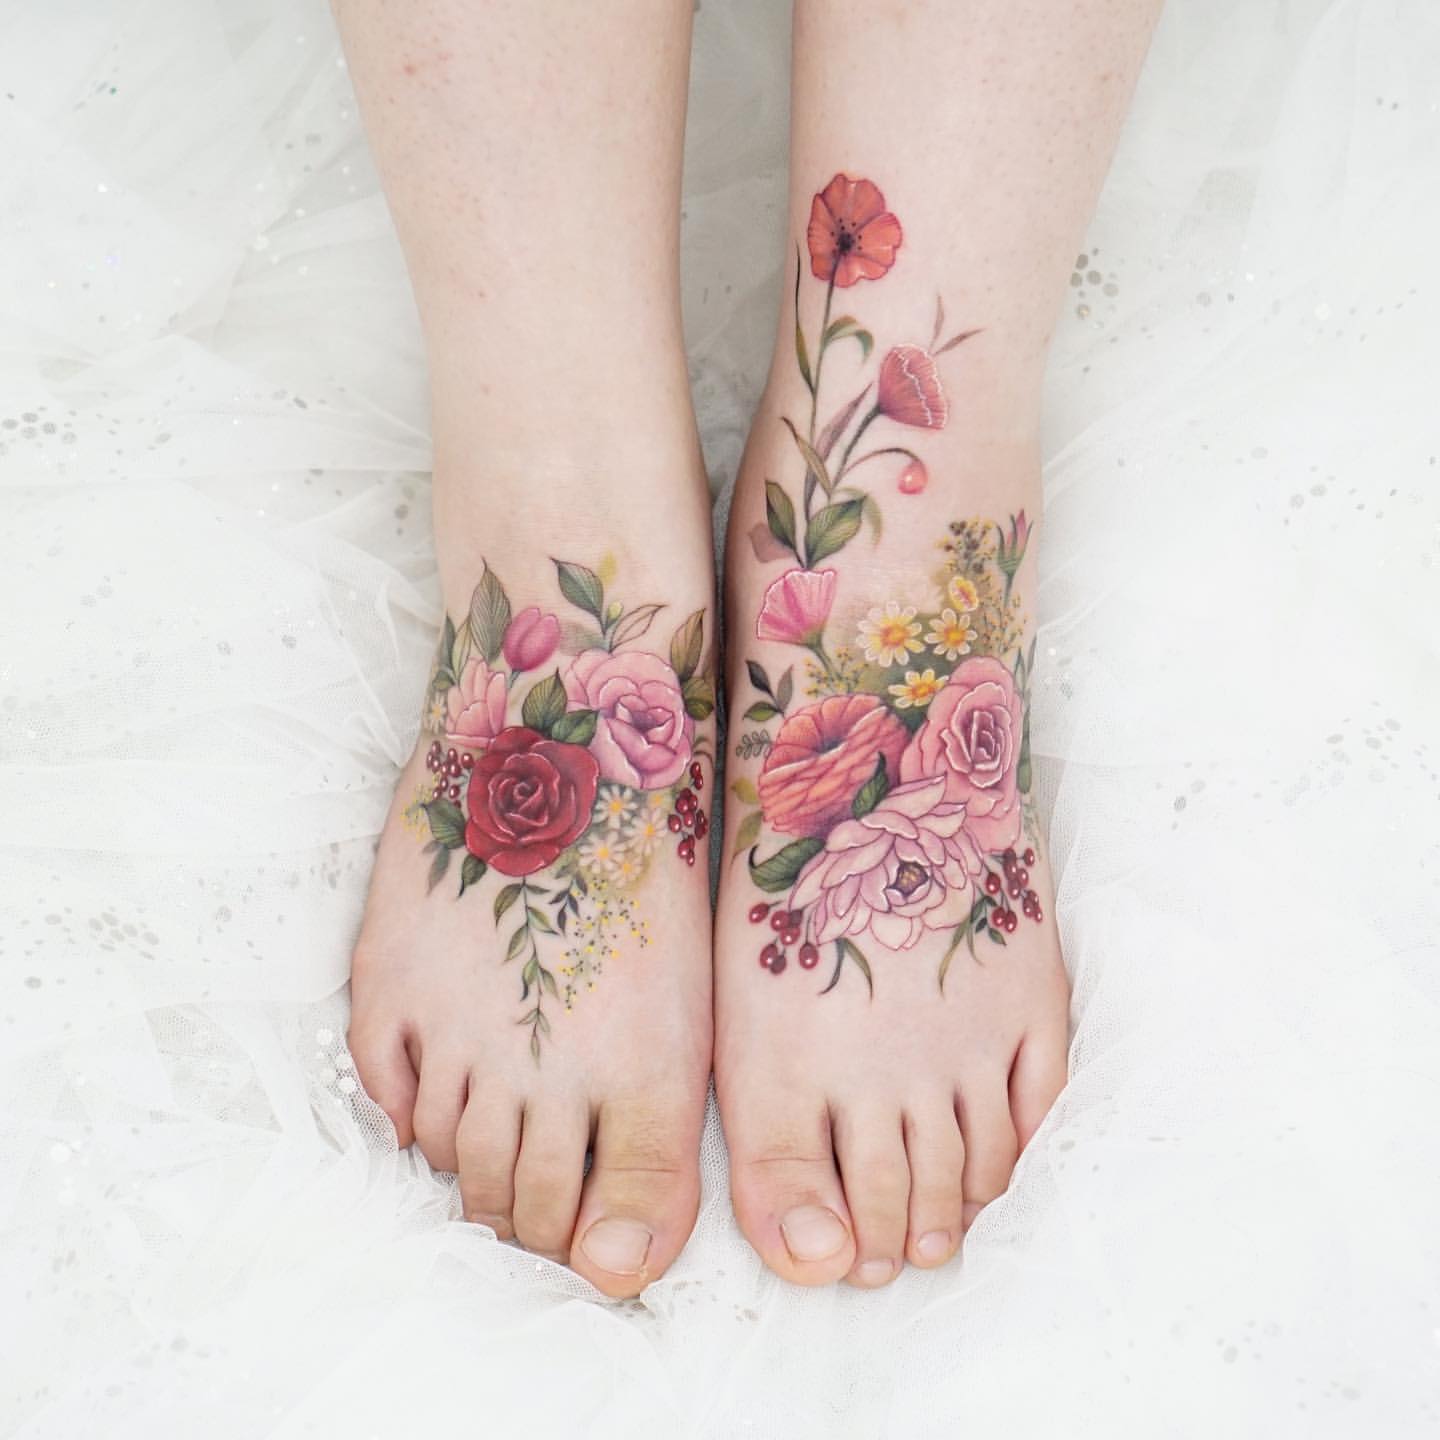 Foot Tattoos for Women 5